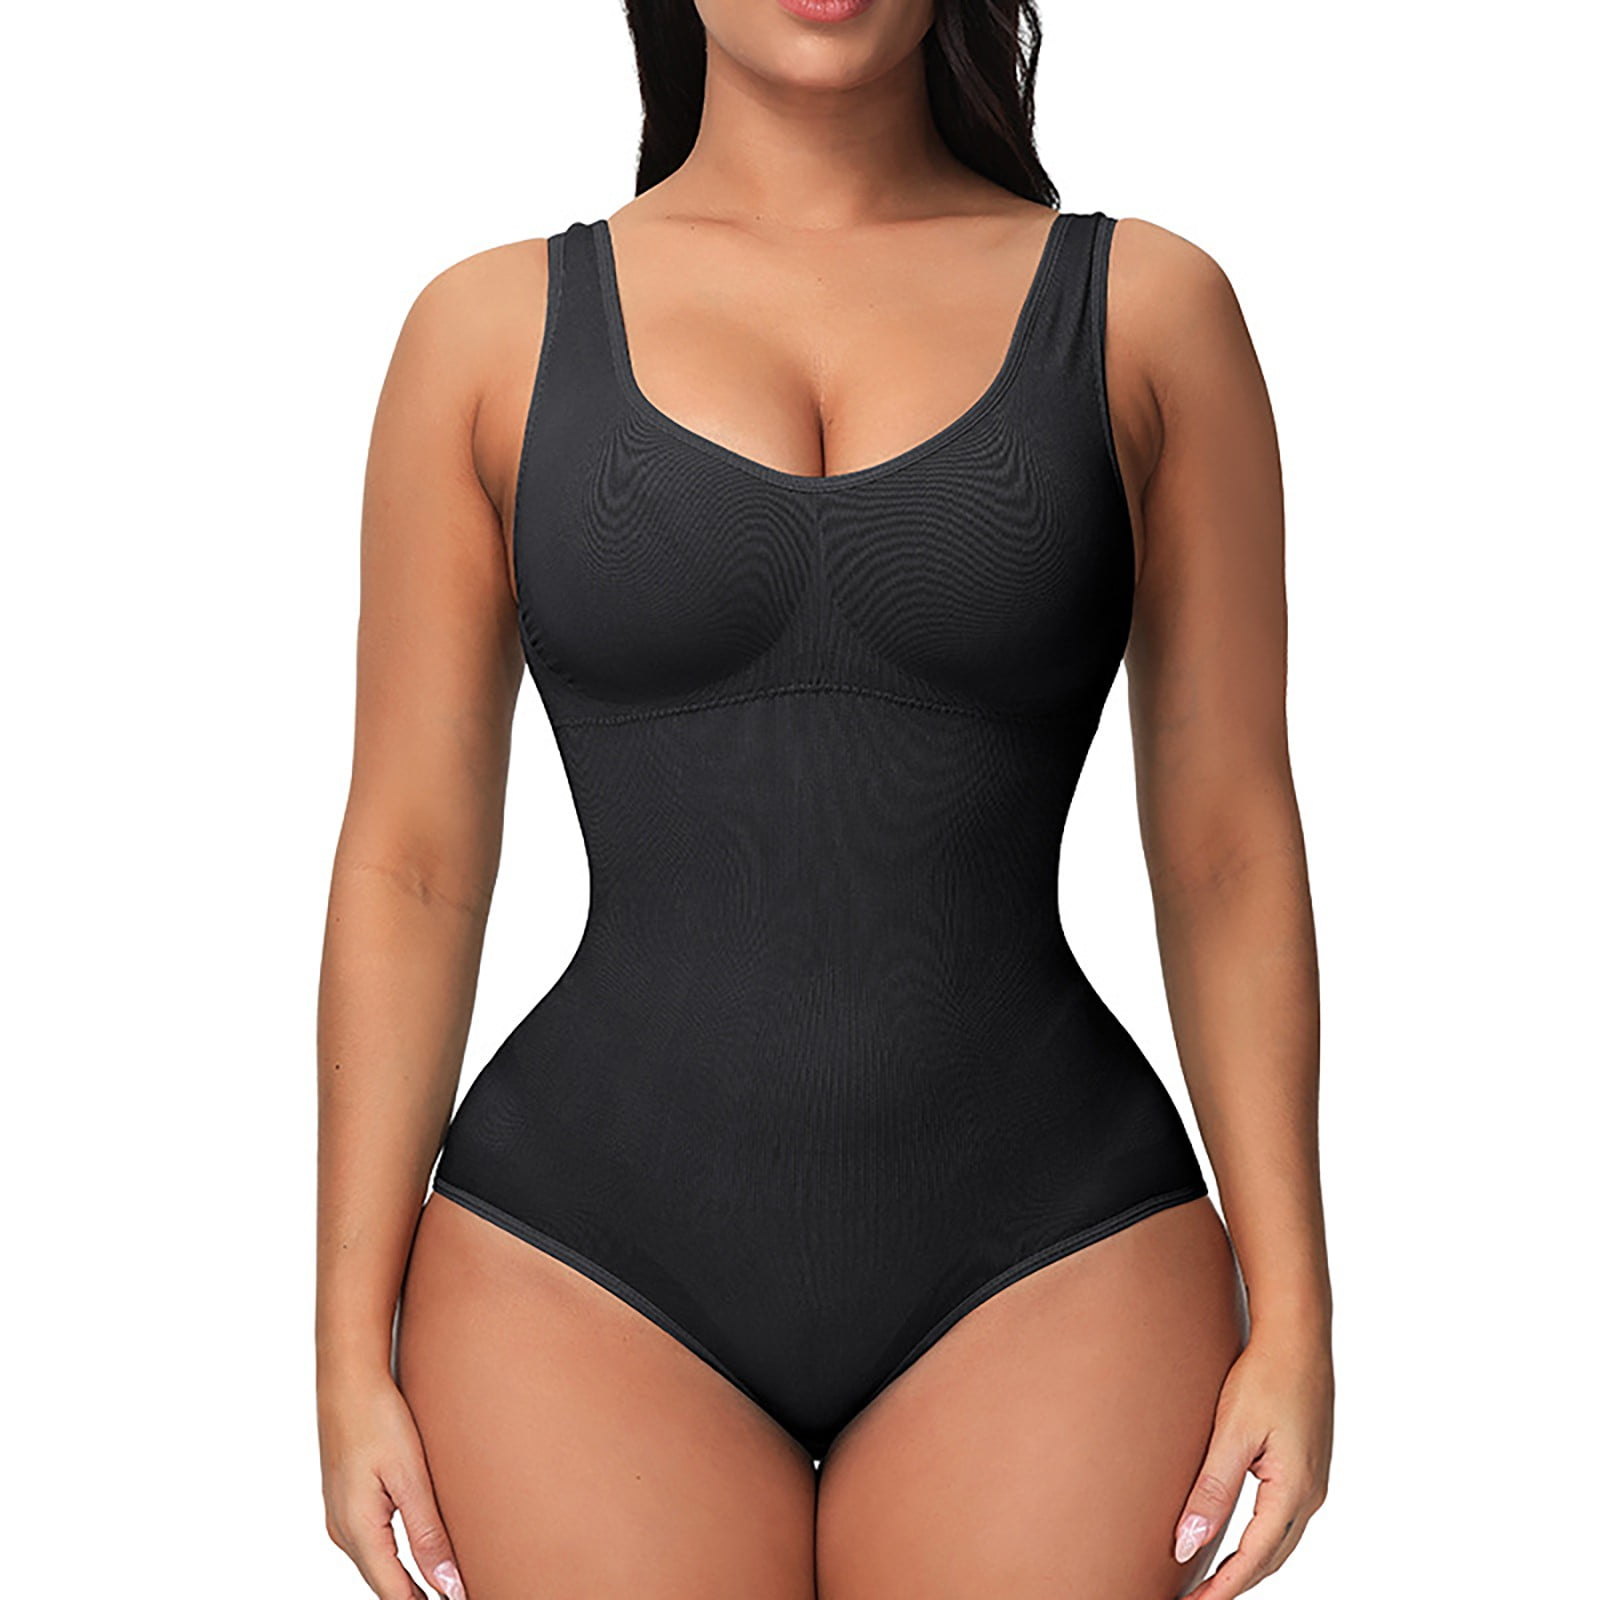 Herrnalise Women's Shapewear With Bra One-piece Attractive And